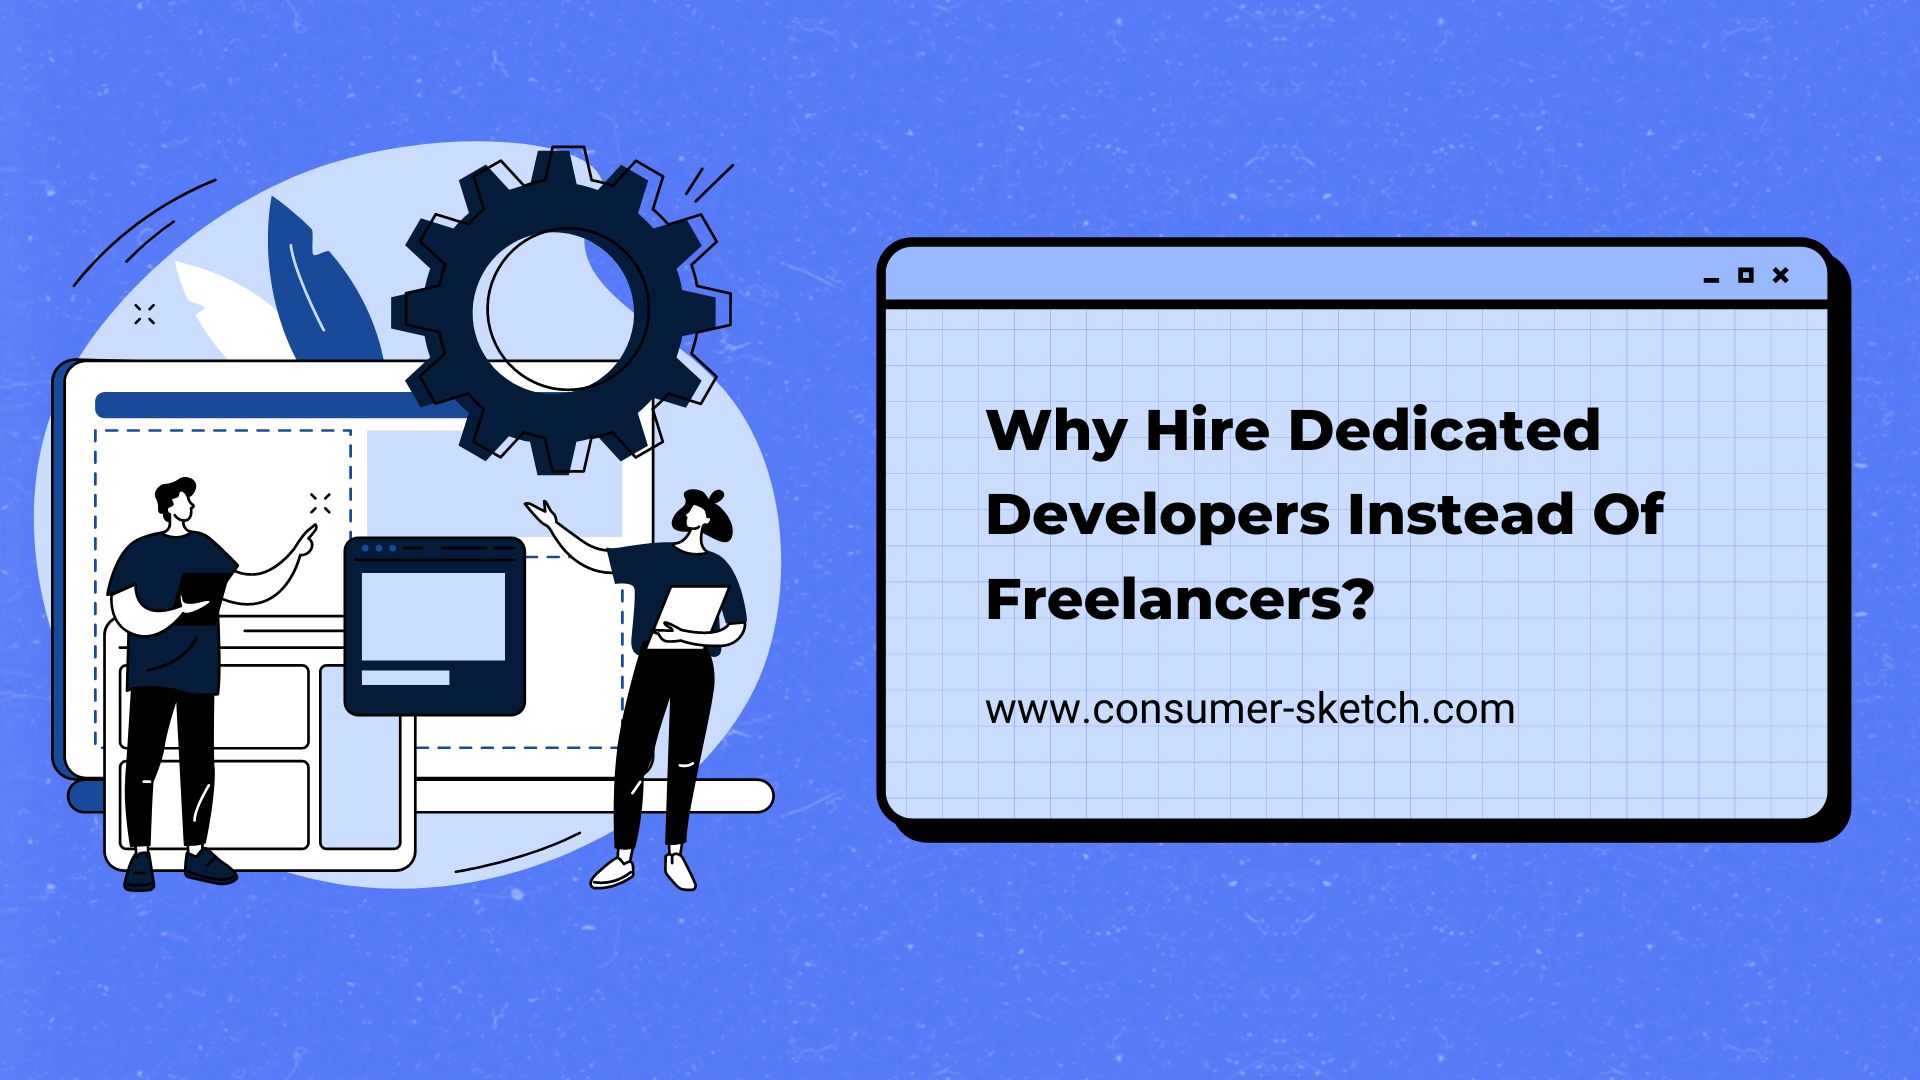 Why Hire Dedicated Developers Instead Of Freelancers?